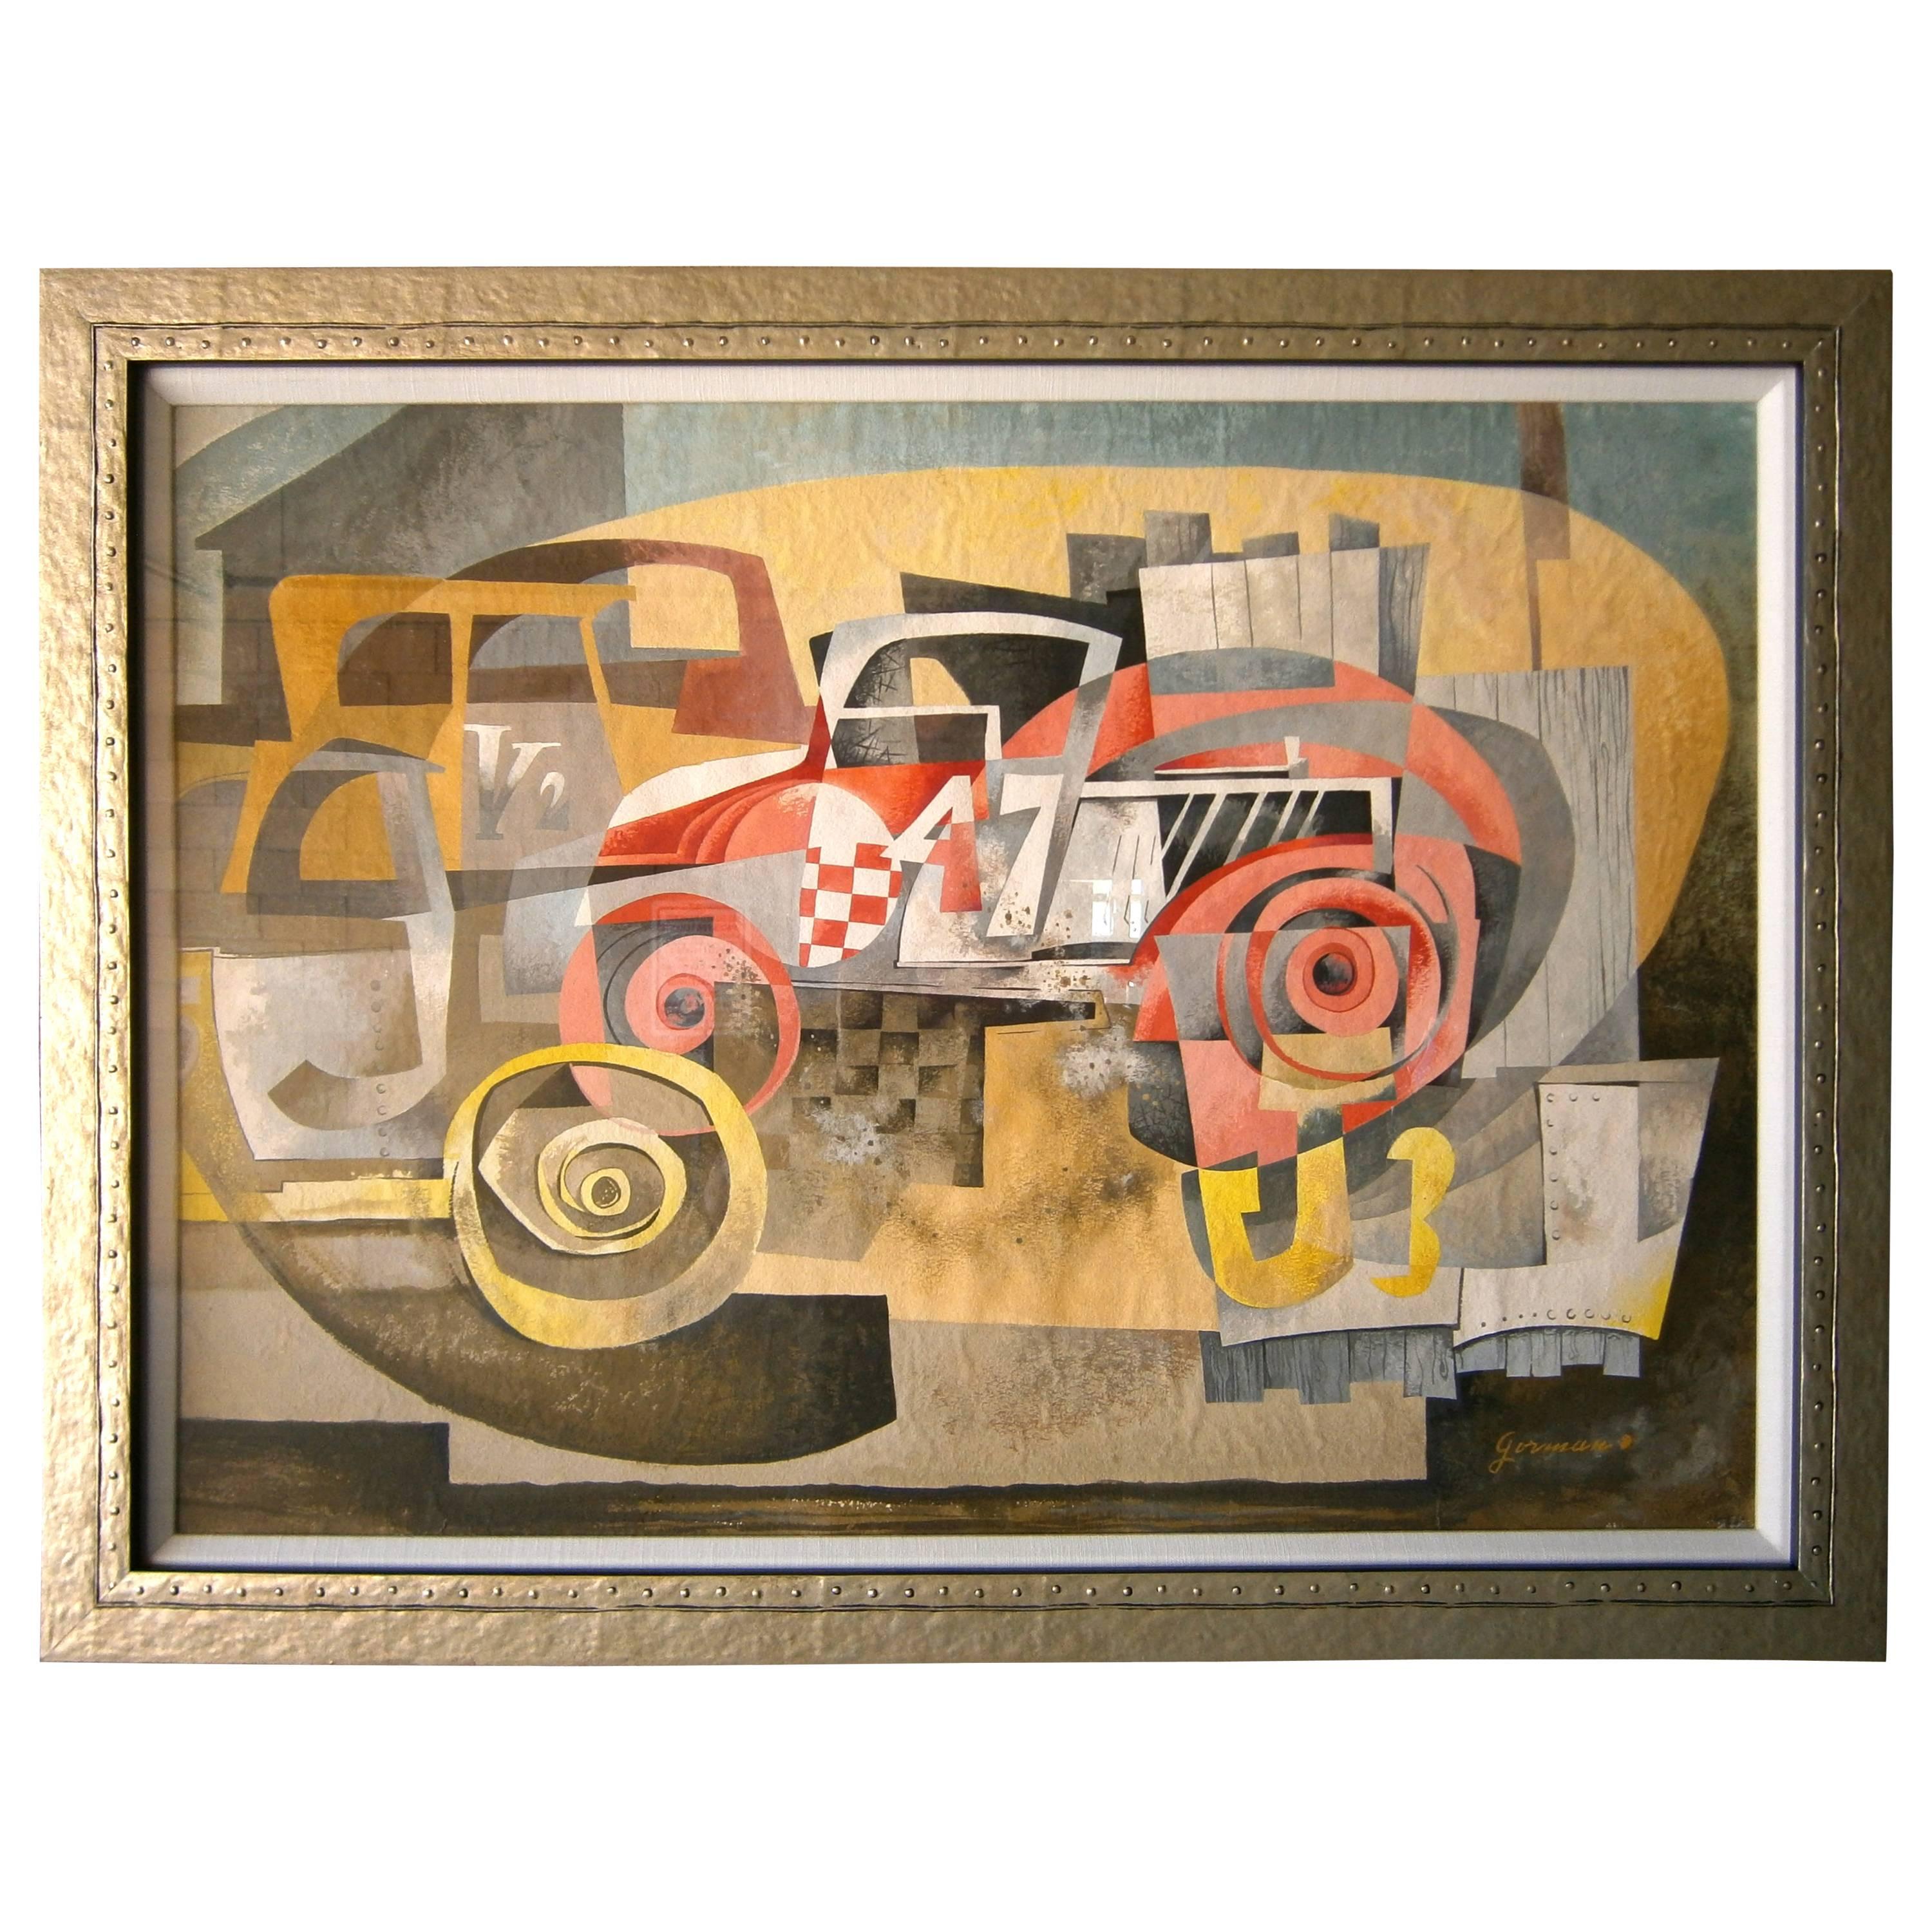 "47", a Cubist Influenced Abstract Gouache and Watercolor by Gorman, c. 1950's For Sale